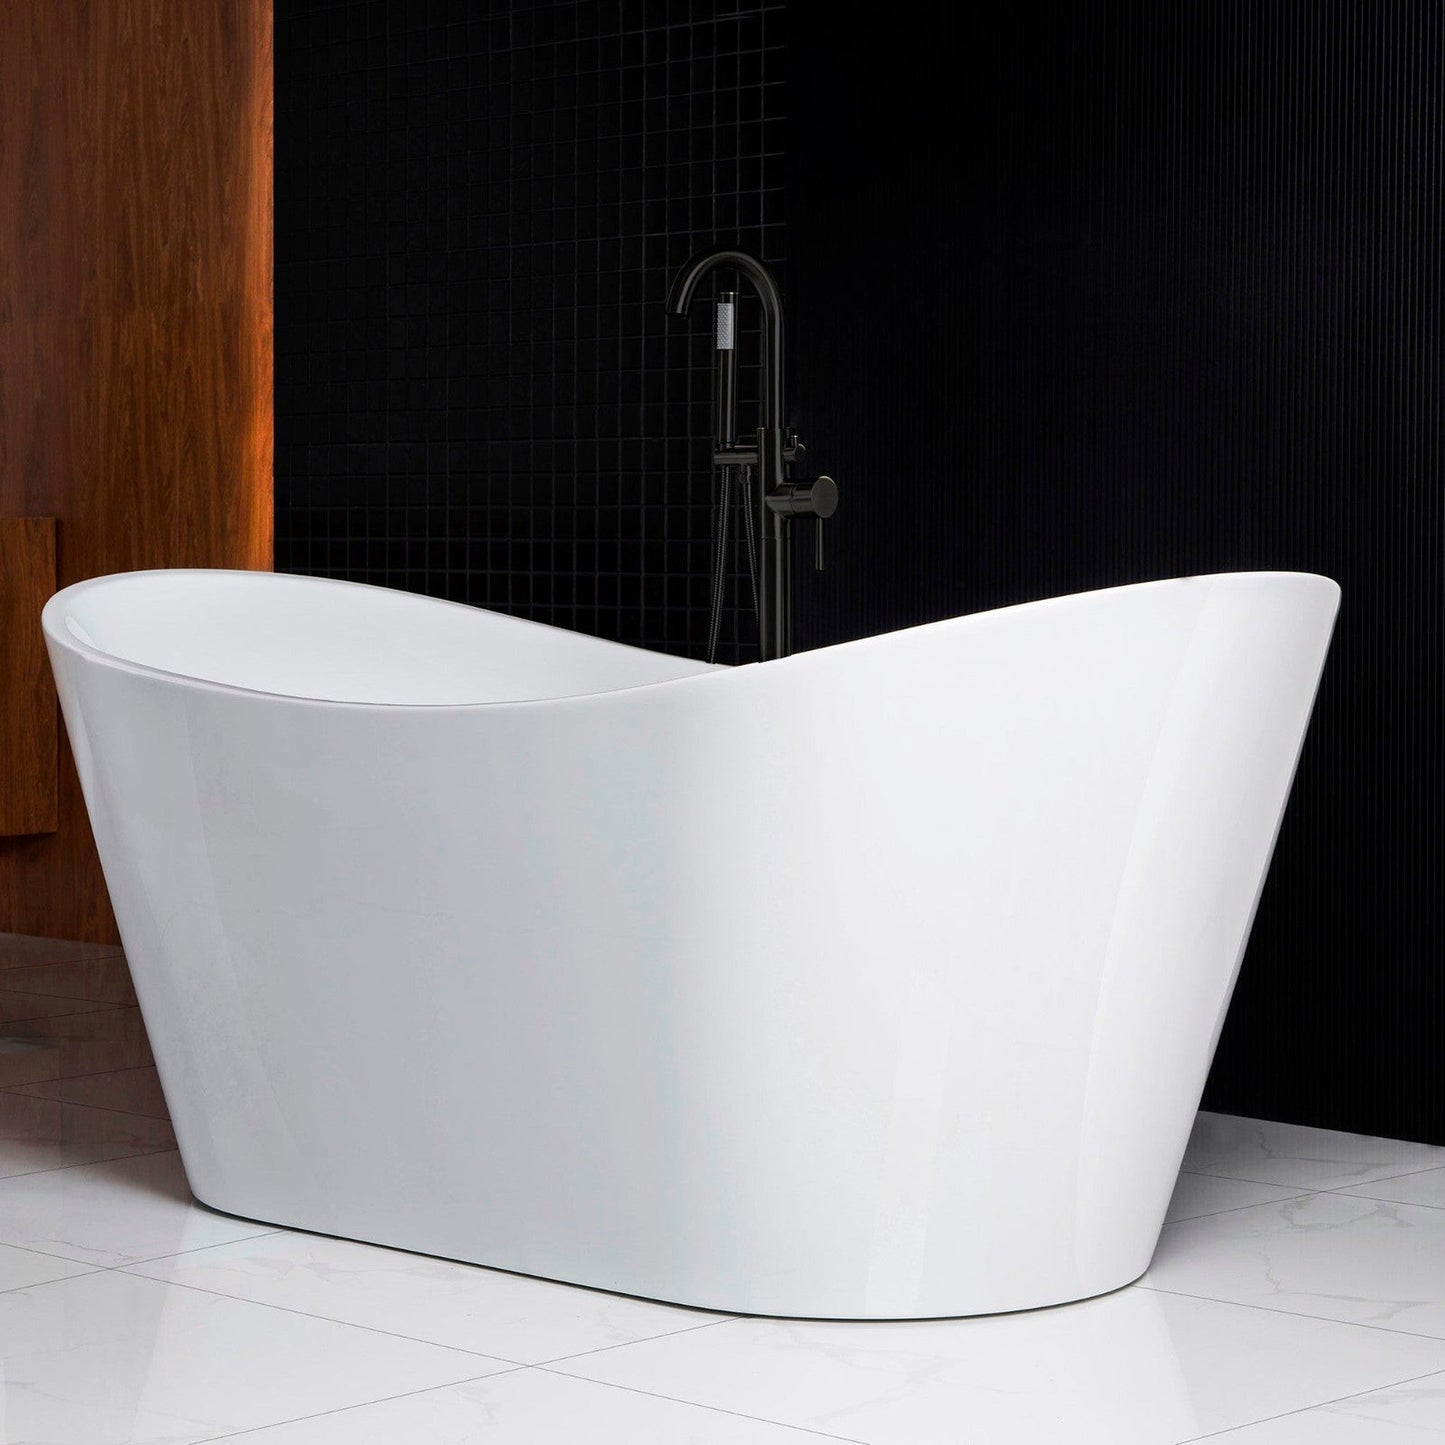 WoodBridge B0010 67" White Acrylic Freestanding Contemporary Soaking Bathtub With Matte Black Drain, Overflow, F0037MB Tub Filler and Caddy Tray